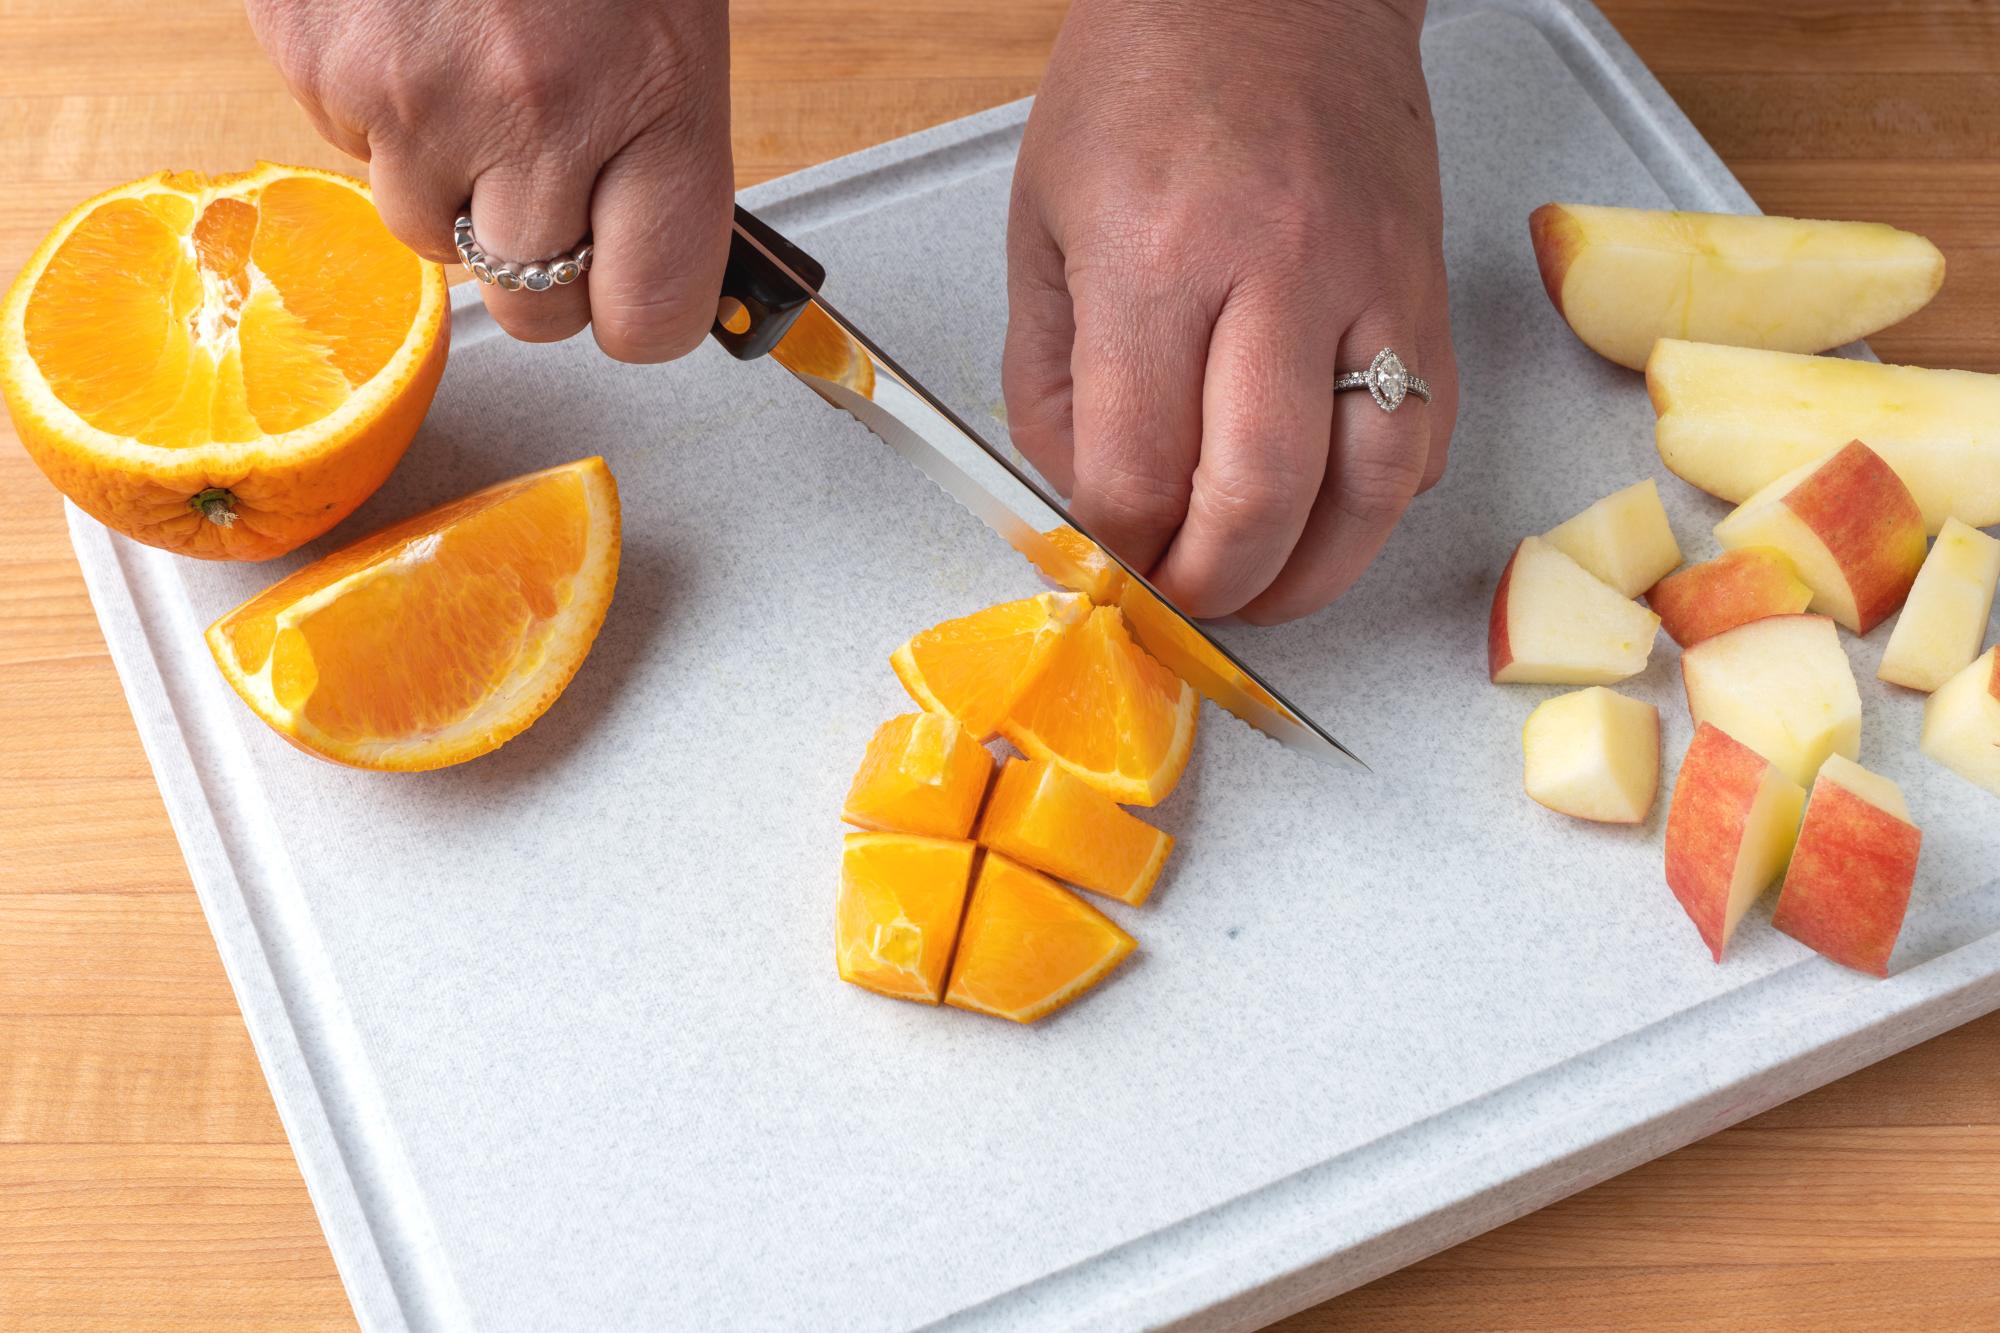 Use the Trimmer to cut the orange into chunks.